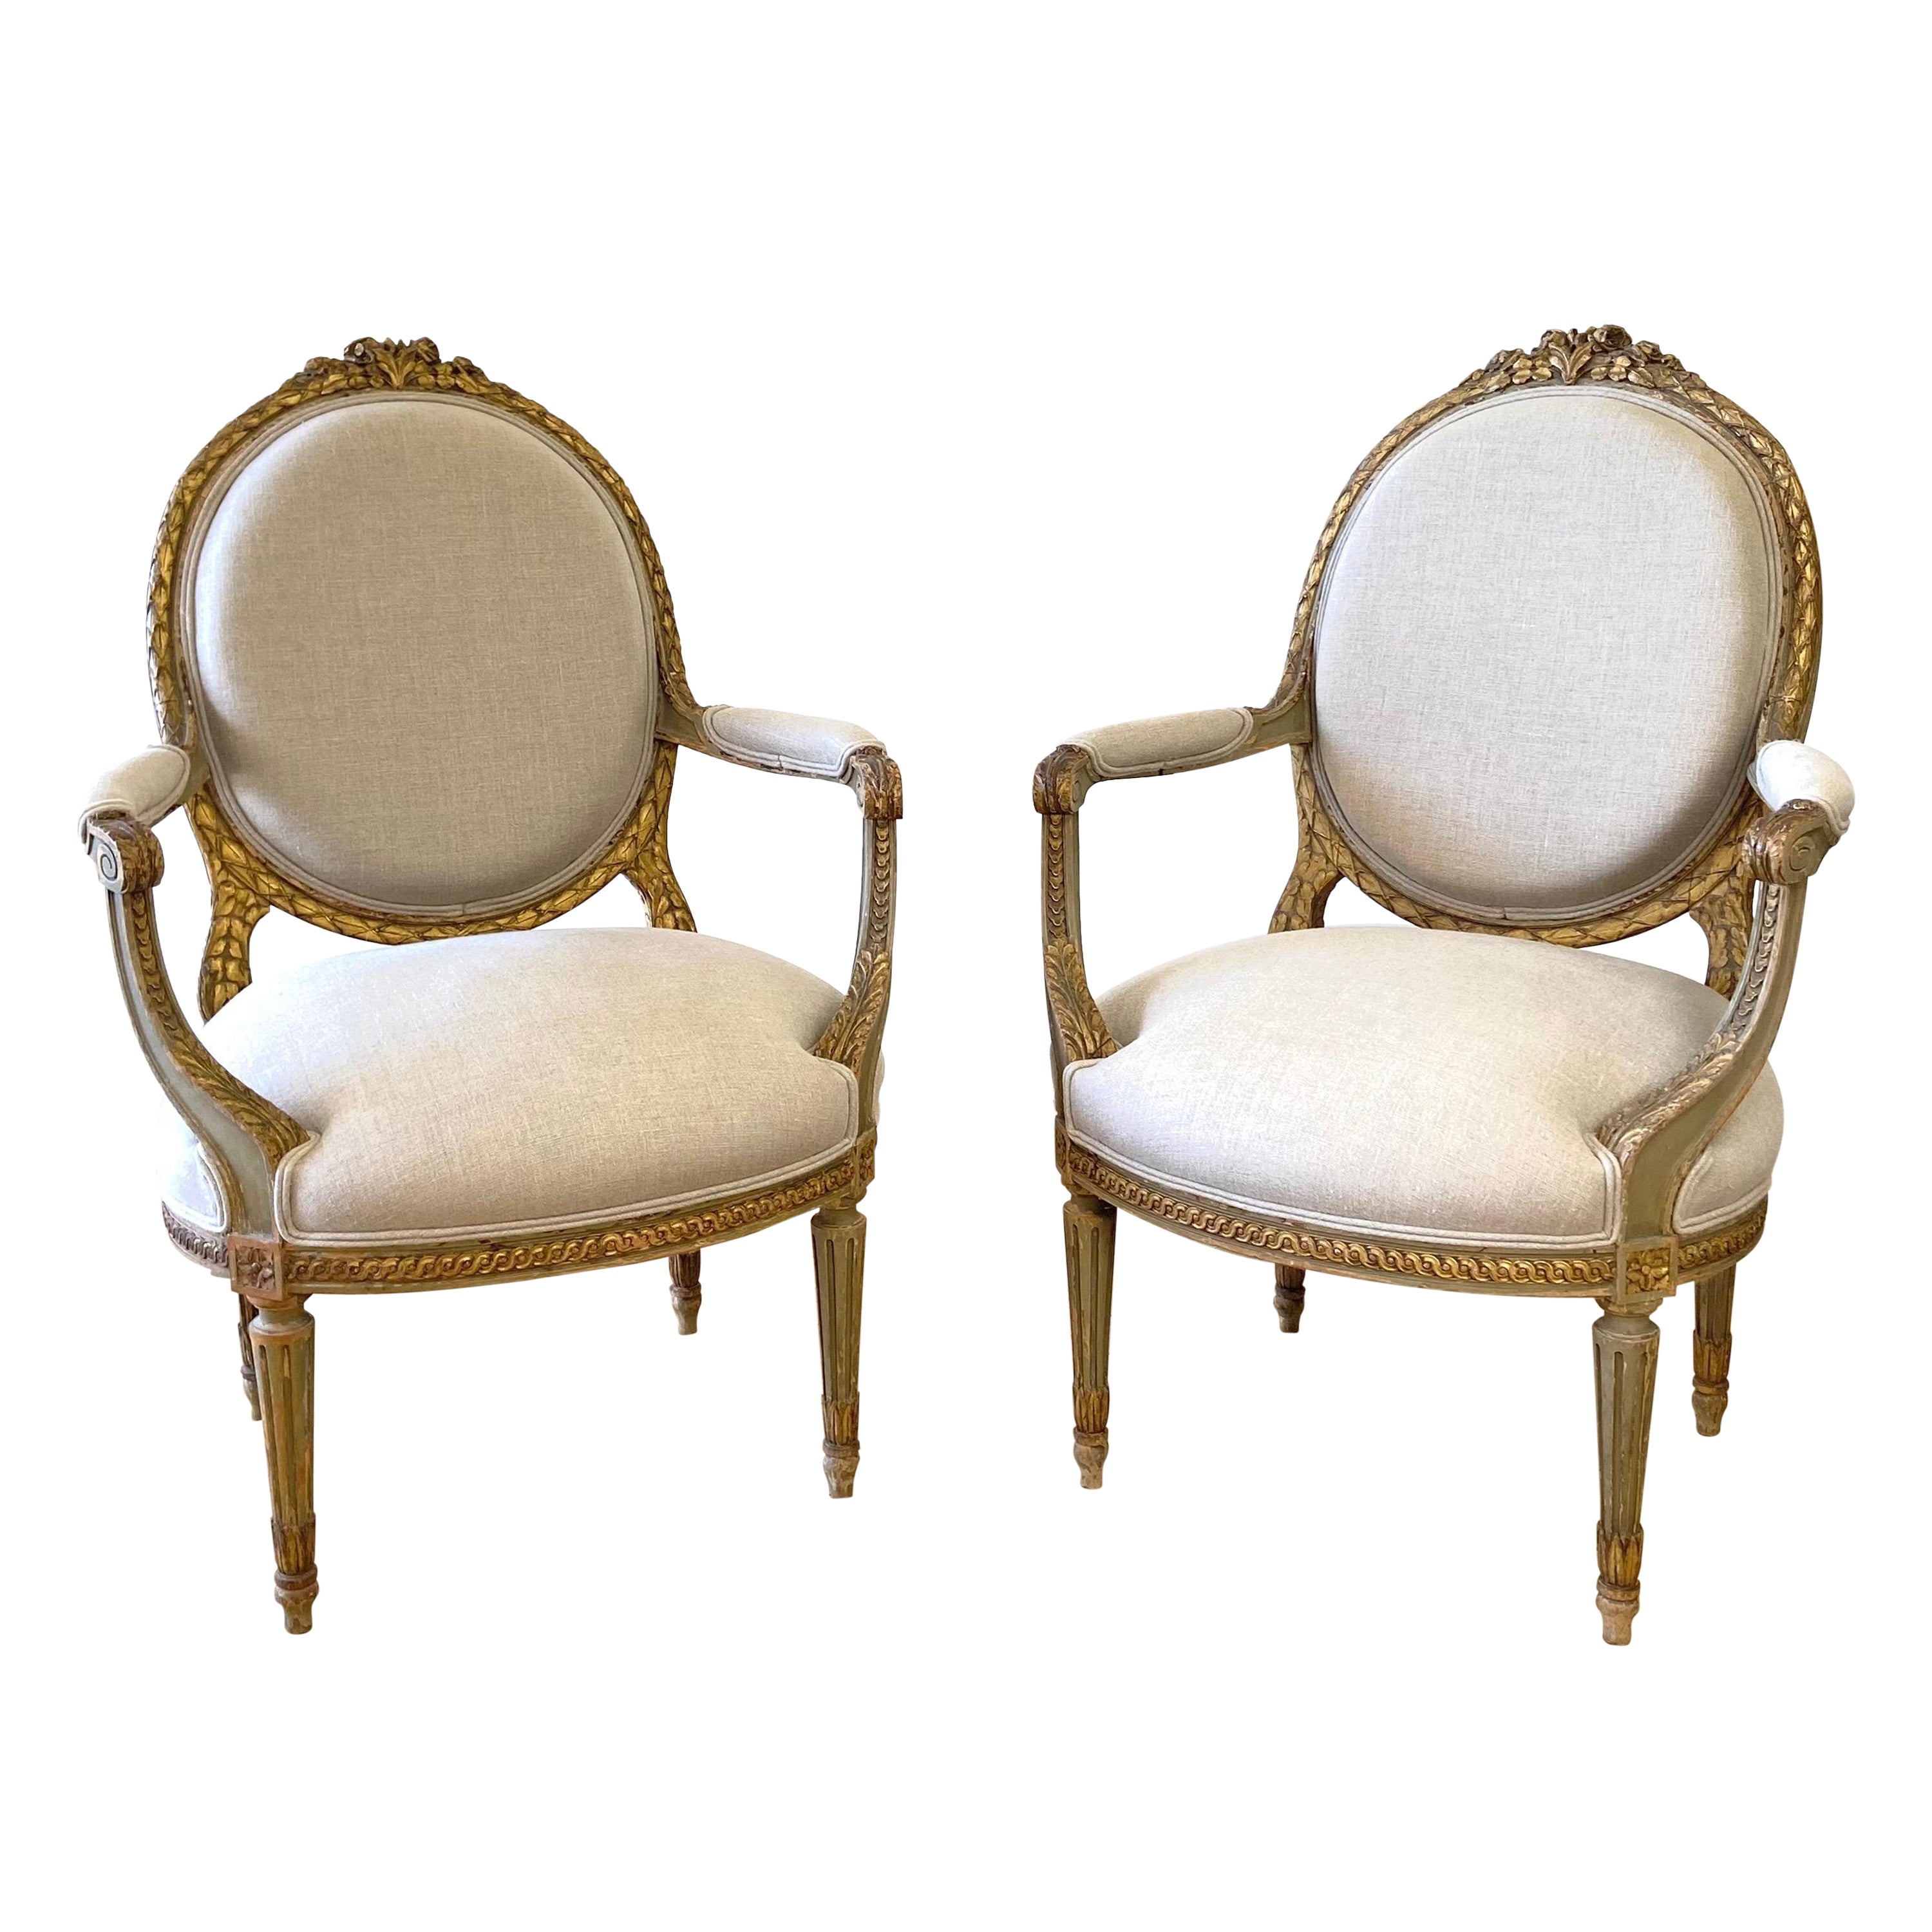 Antique Pair of French Louis XVI Style Arm Chairs Original Paint and Giltwood For Sale